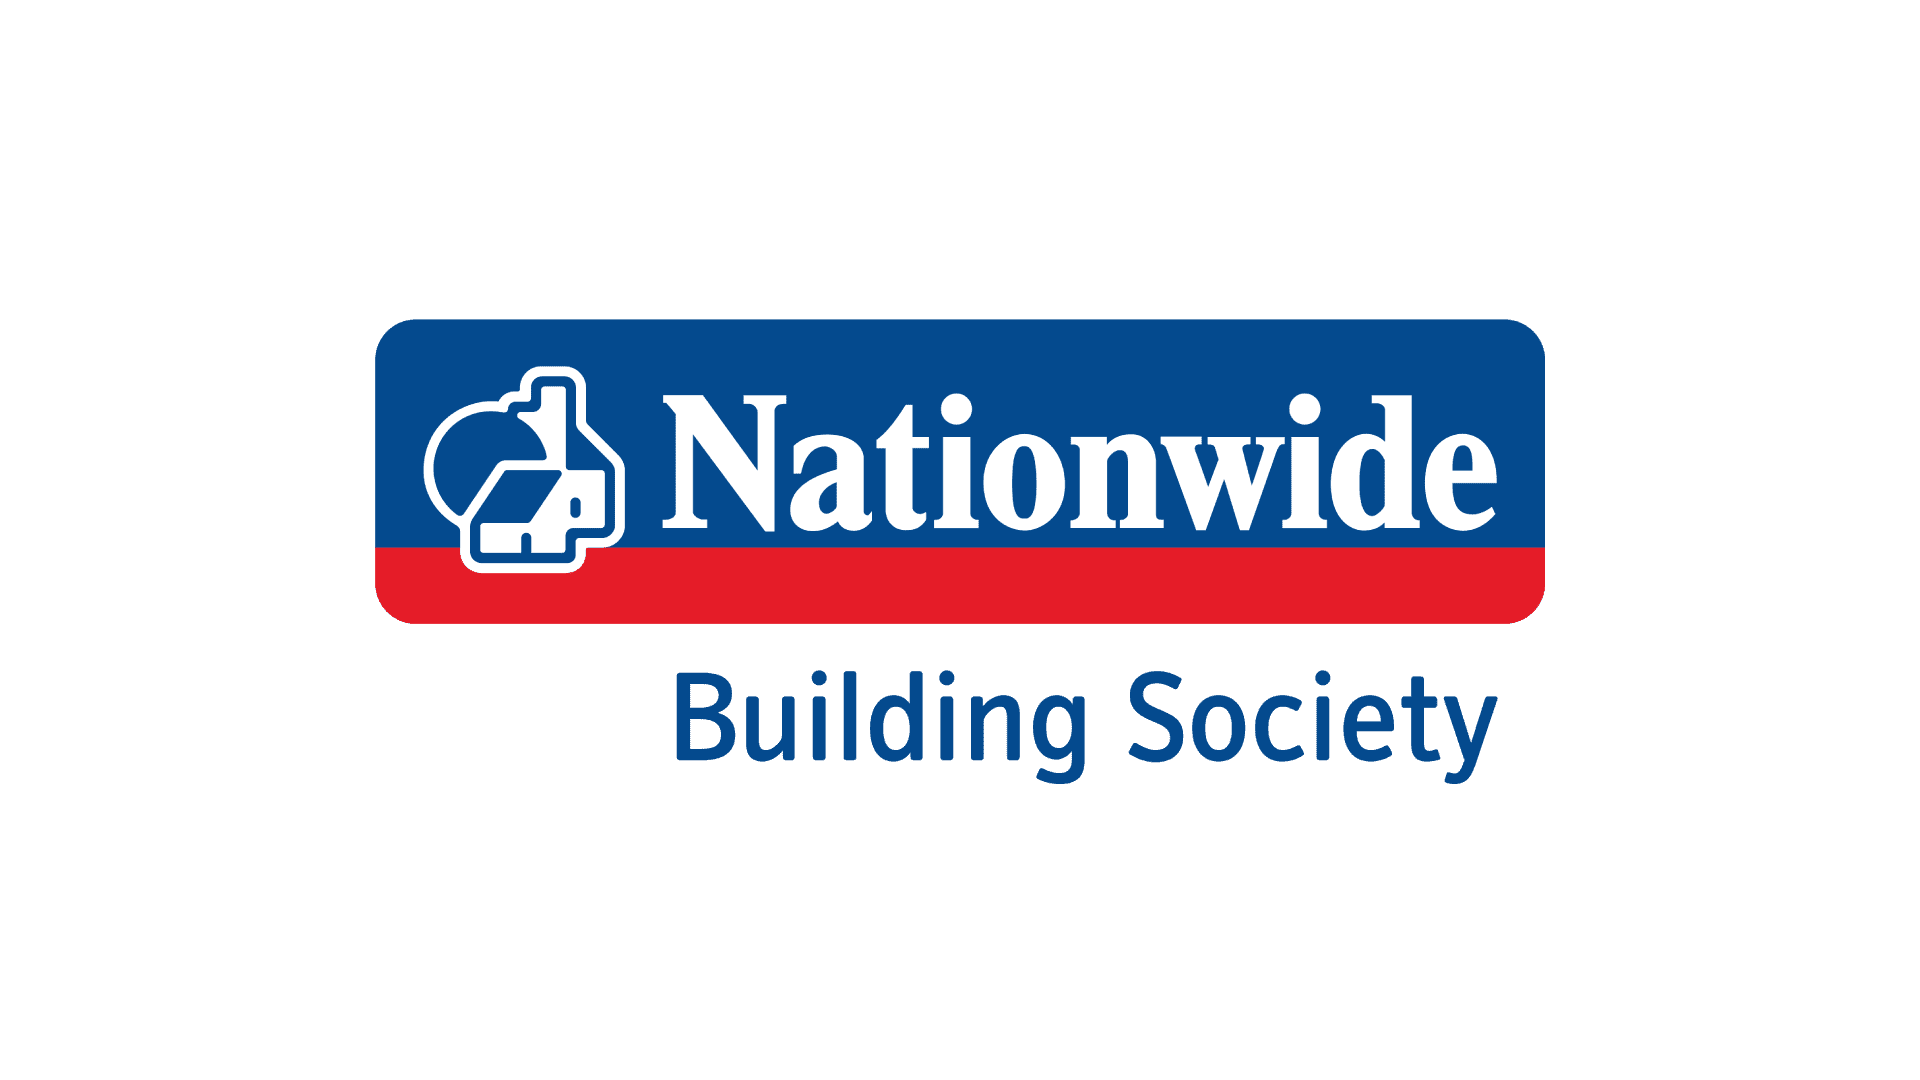 Nationwide Building Society works with CADS